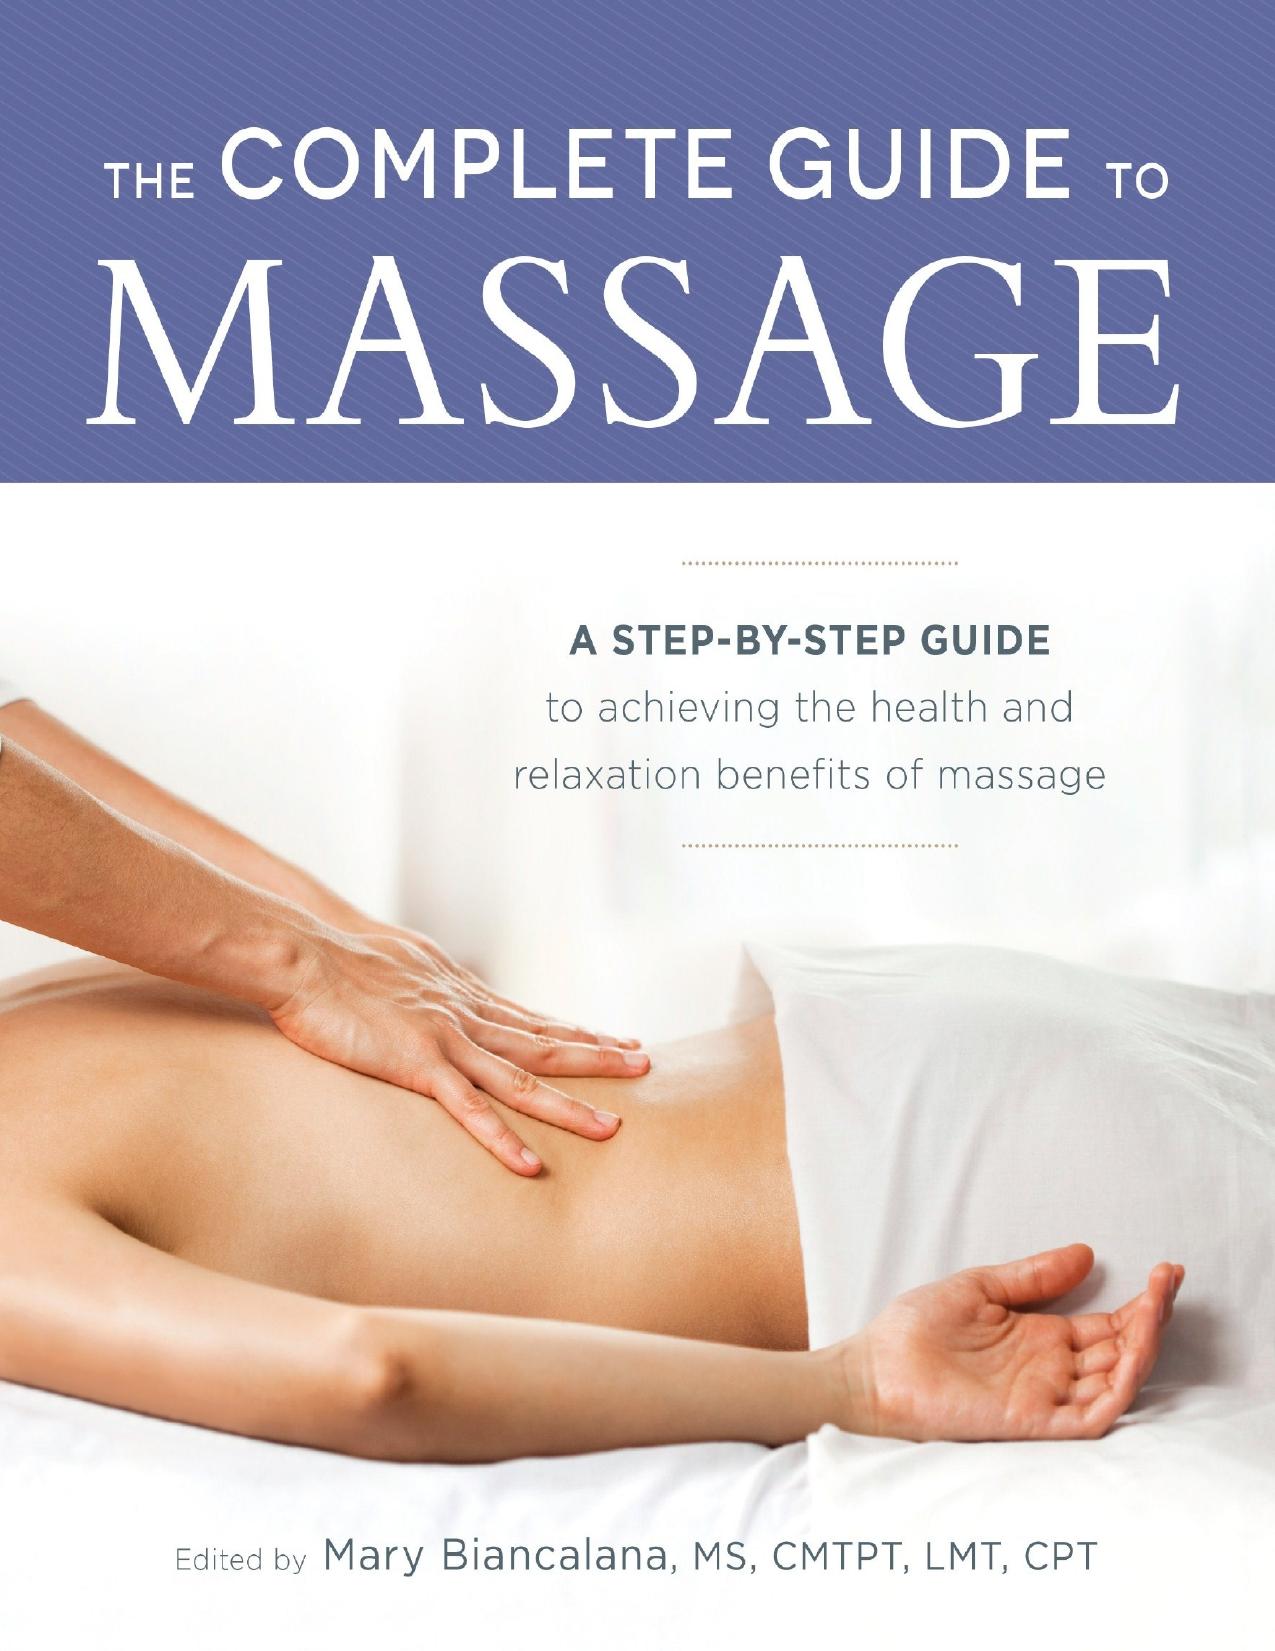 The Complete Guide to Massage: A Step-by-Step Guide to Achieving the Health and Relaxation Benefits of Massage - PDFDrive.com